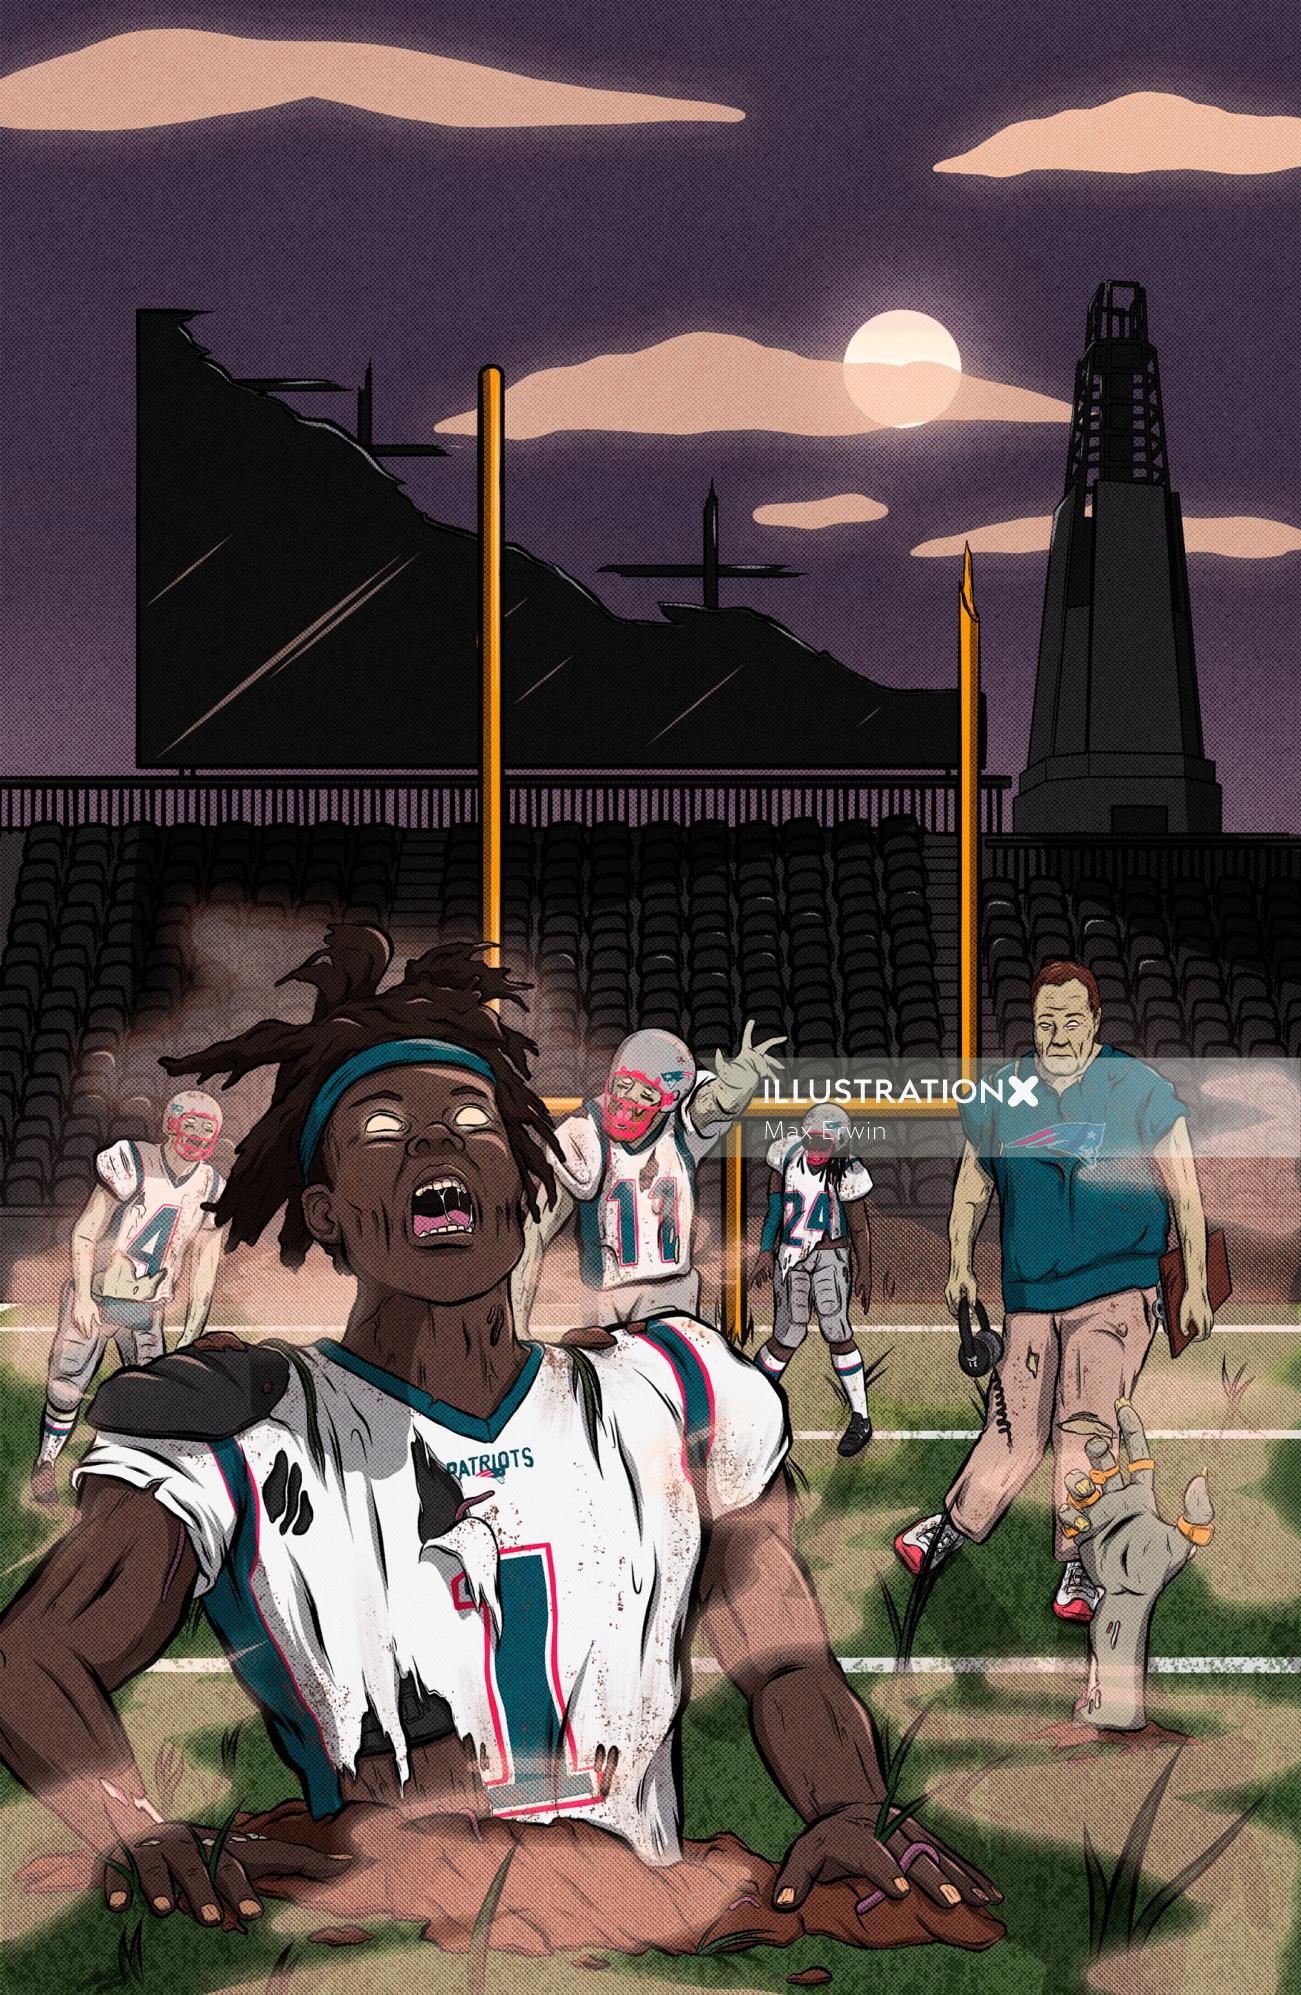 Poster featuring Cam of the Dead Sports